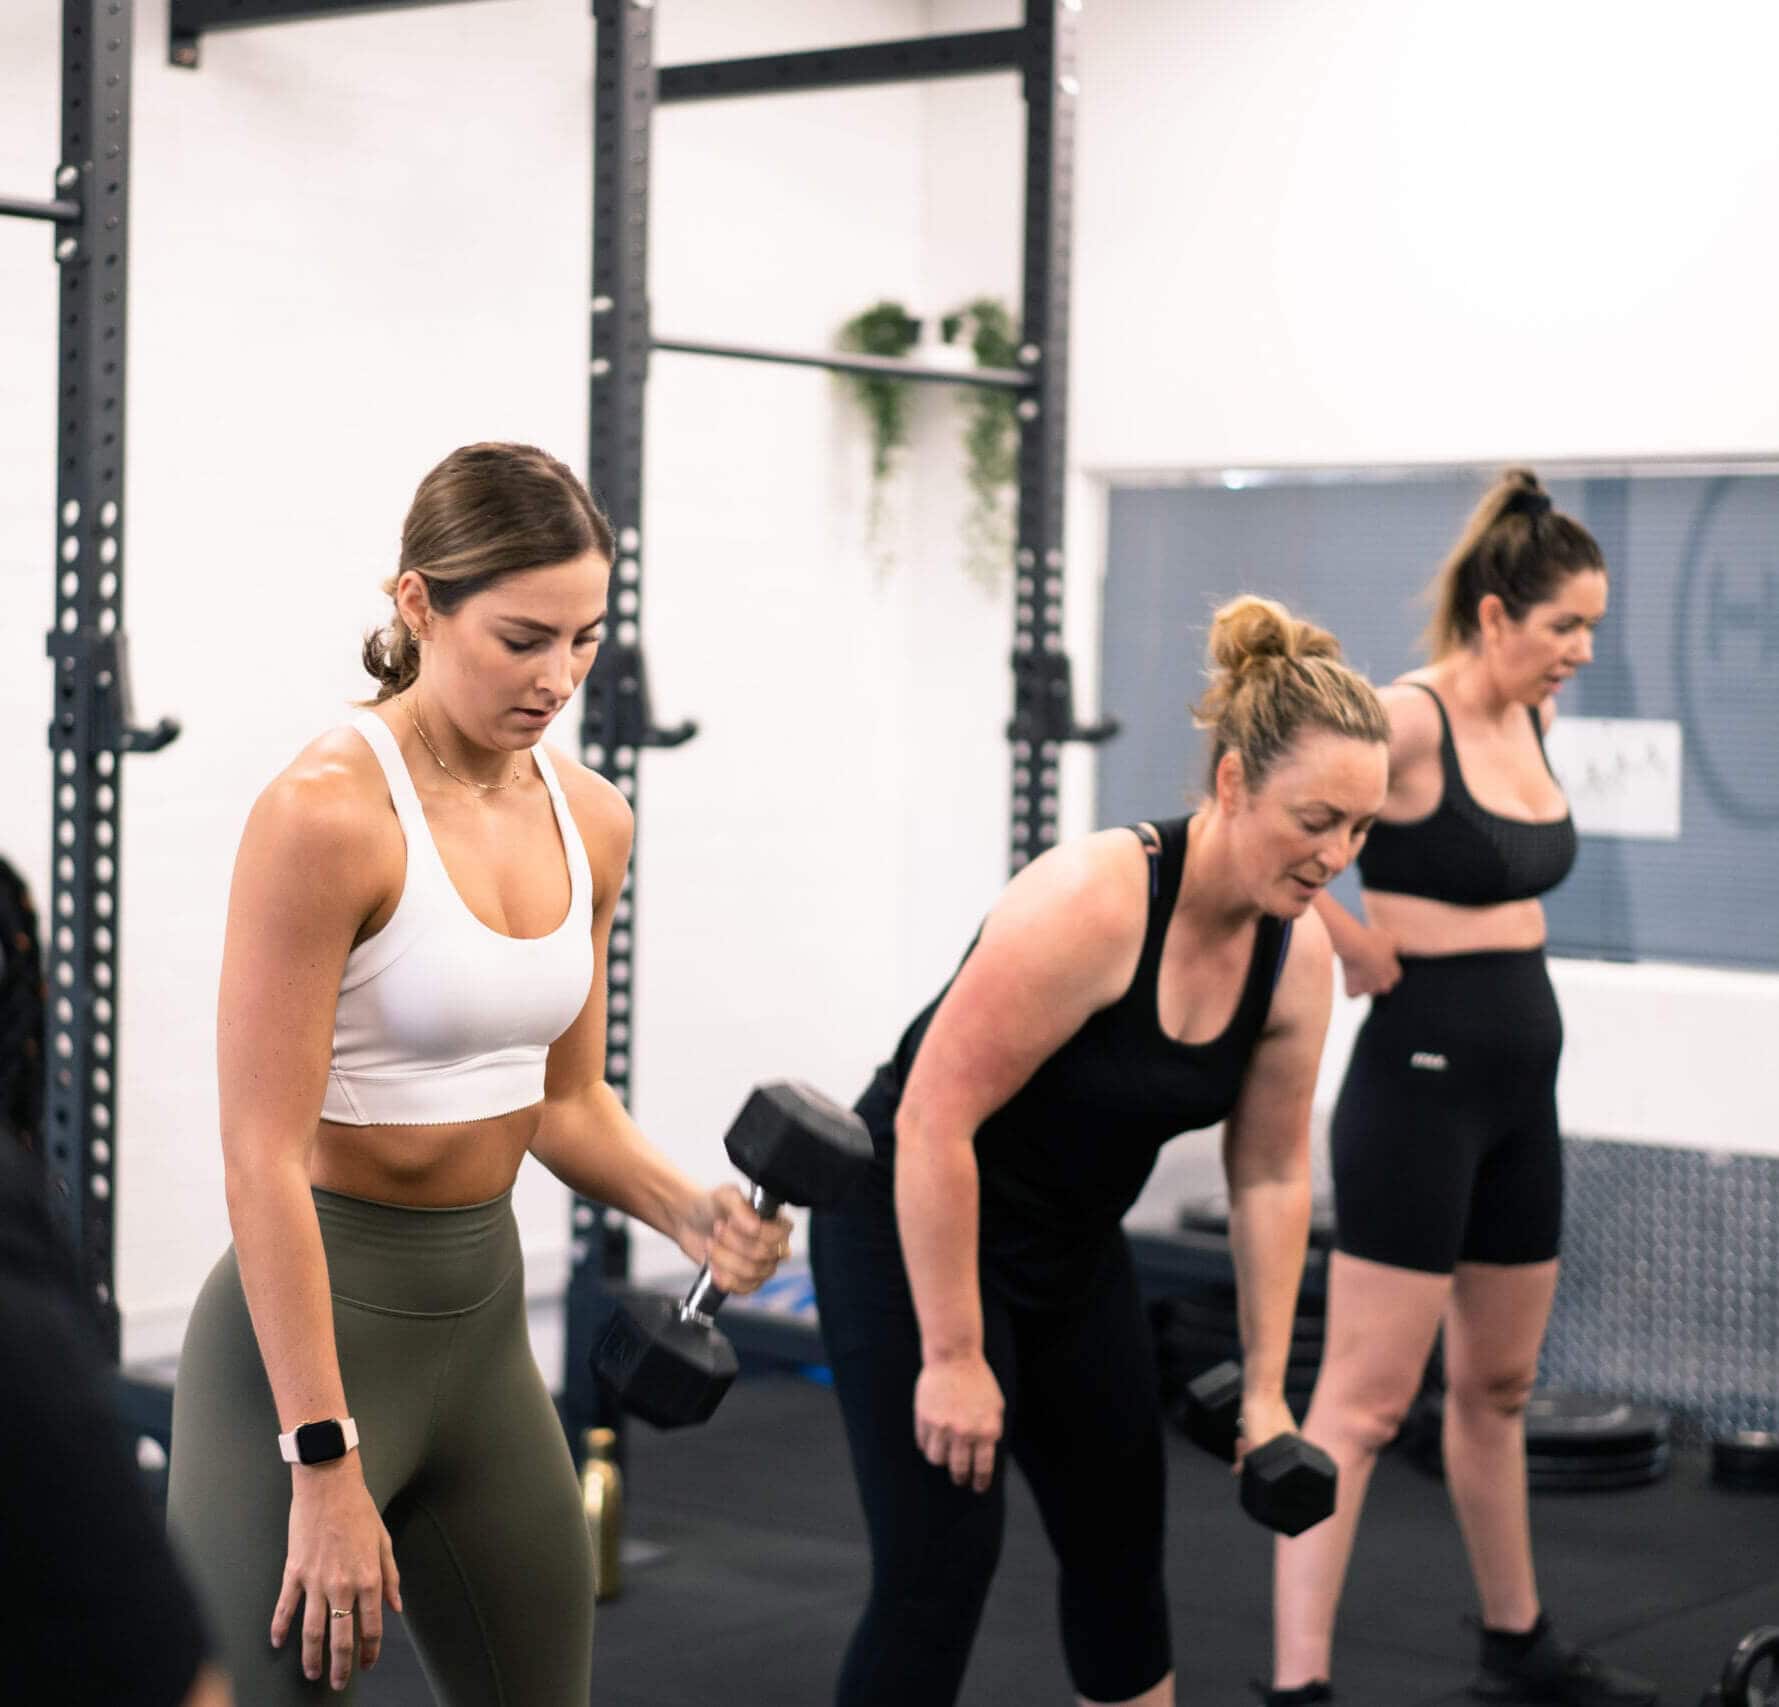 About us - Women Training